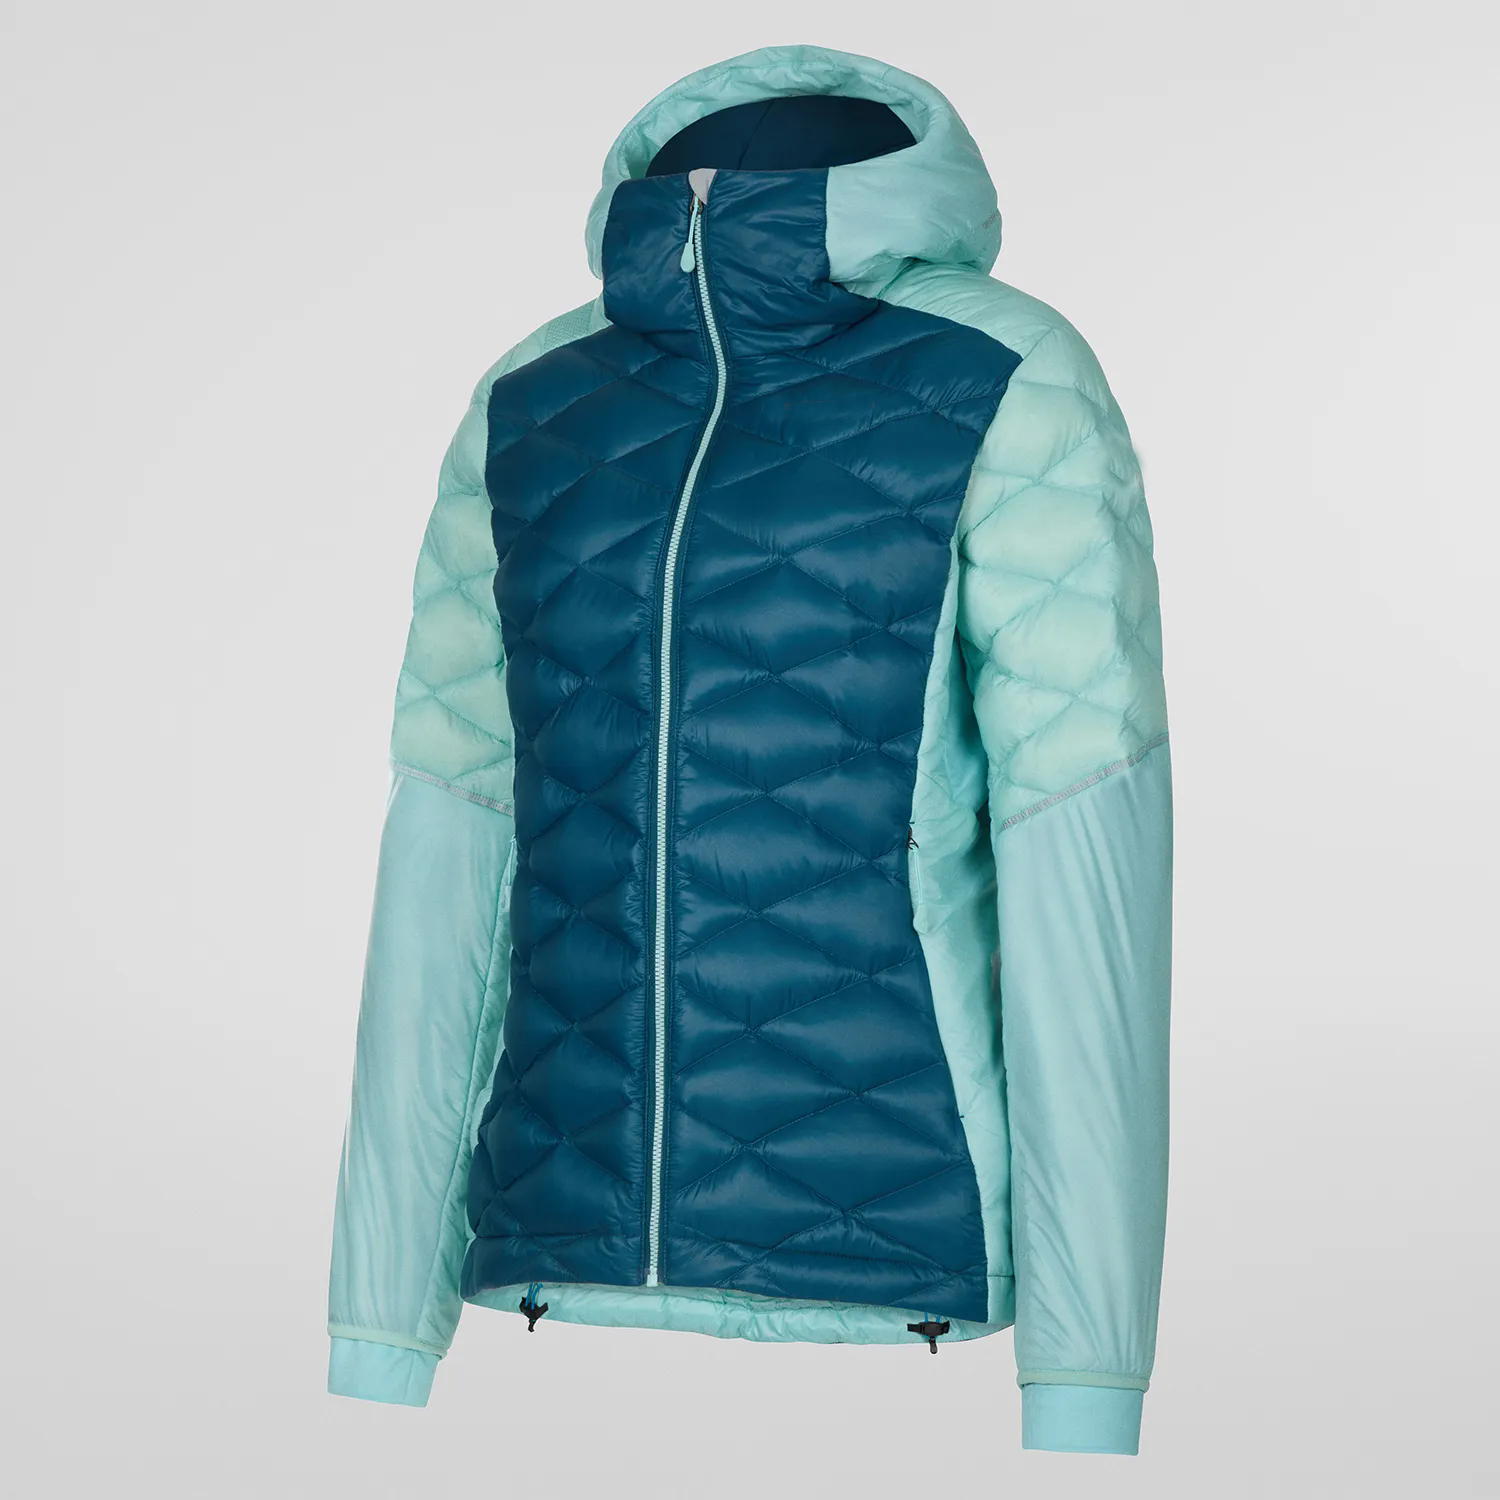 https://www.passionouterwear.com/ladies-mountaineering-jackets-shells-2-product/